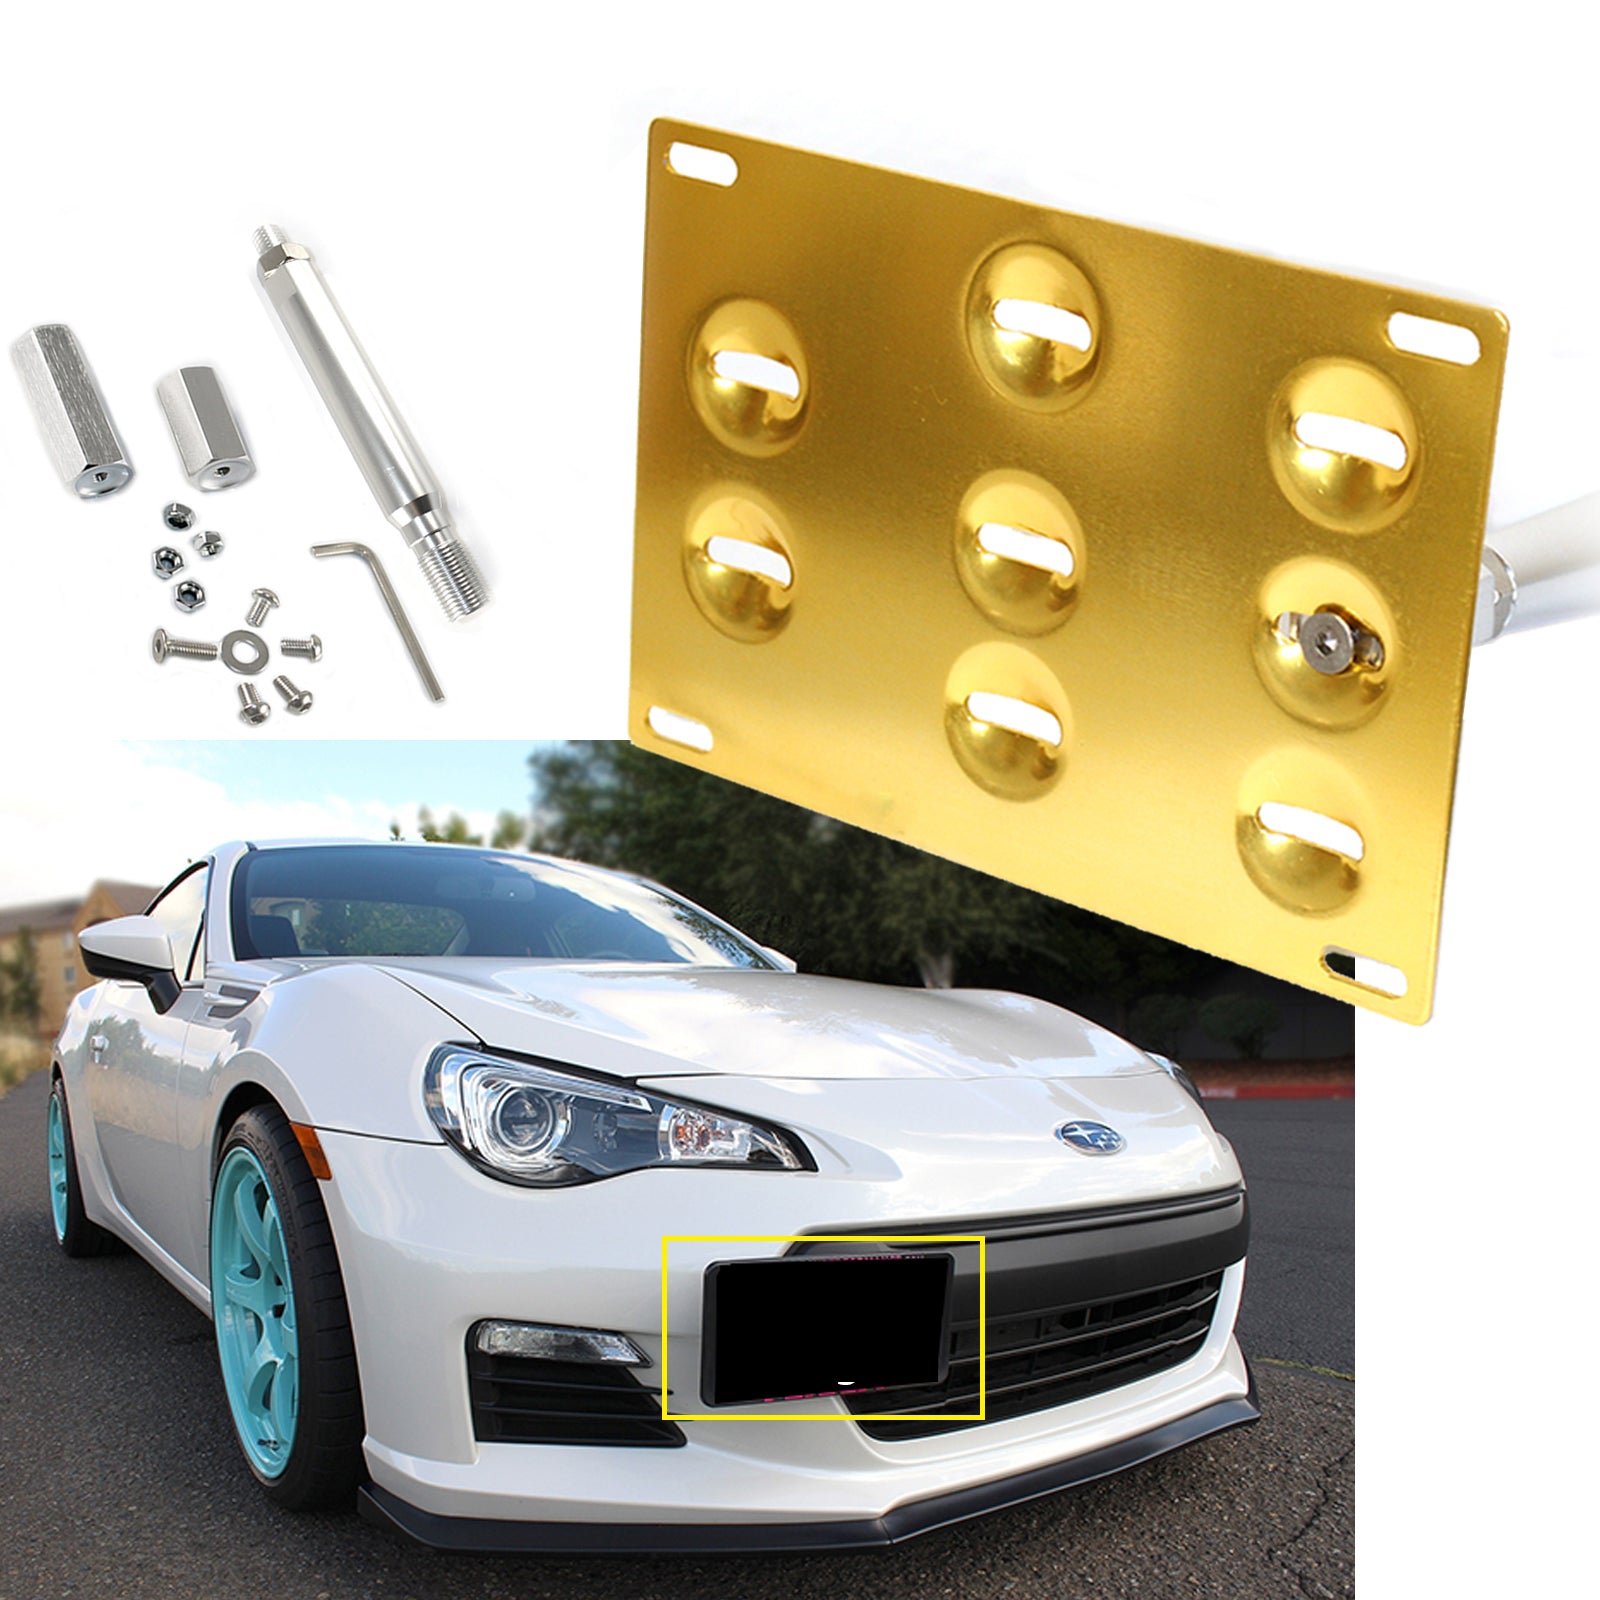 GTP Front Tow Hook License Plate Bracket for Toyota 86 Scion Frs, Subaru BRZ, 15-up Forester WRX/STI Bumper Relocator